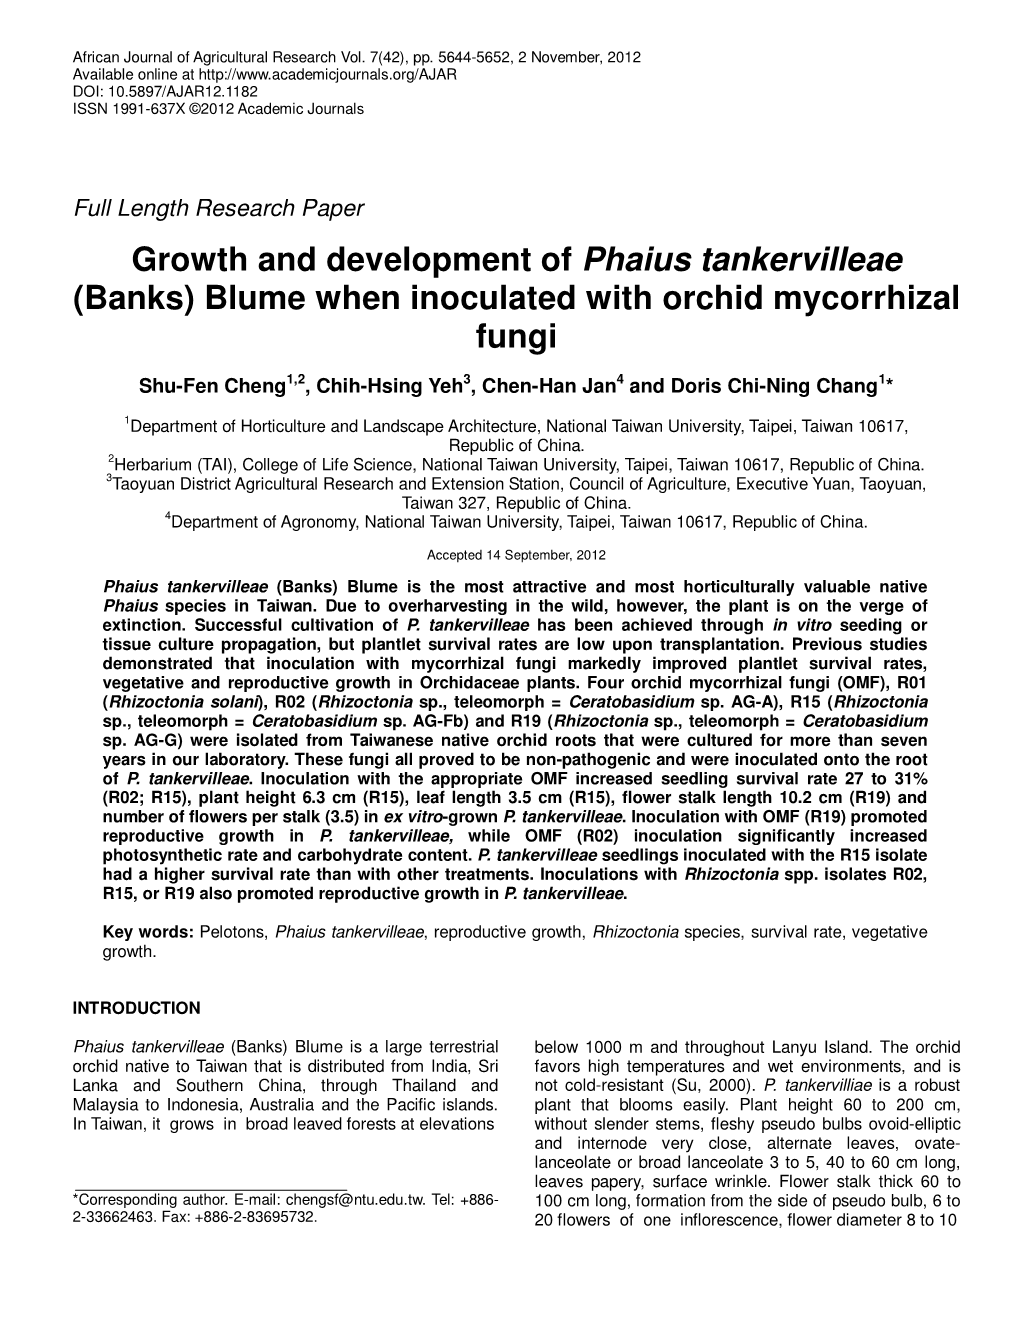 Growth and Development of Phaius Tankervilleae (Banks) Blume When Inoculated with Orchid Mycorrhizal Fungi